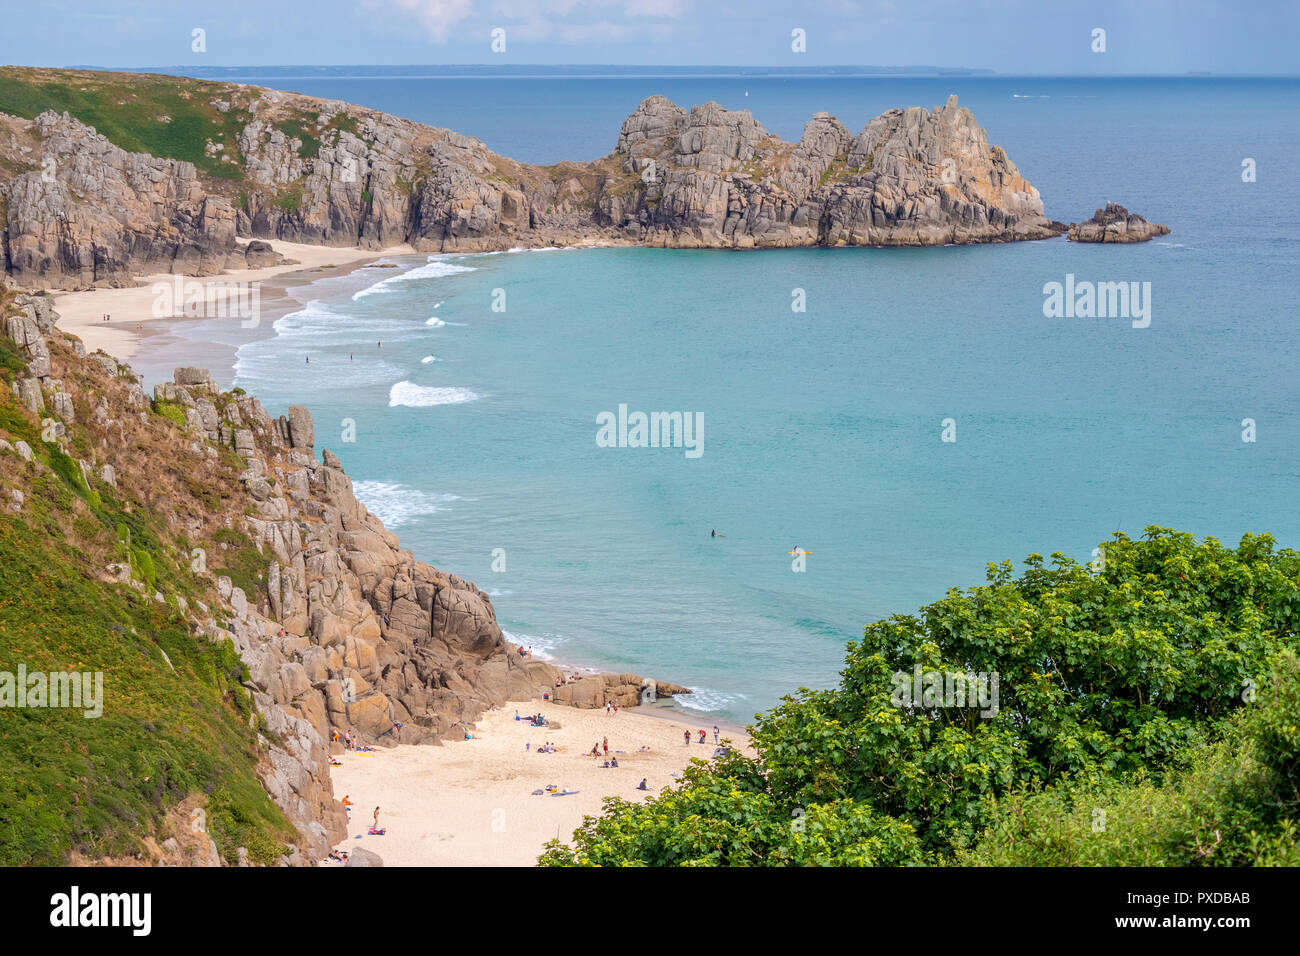 The picturesque beaches at Porthcurno - Cornwall, south west England, UK. Stock Photo